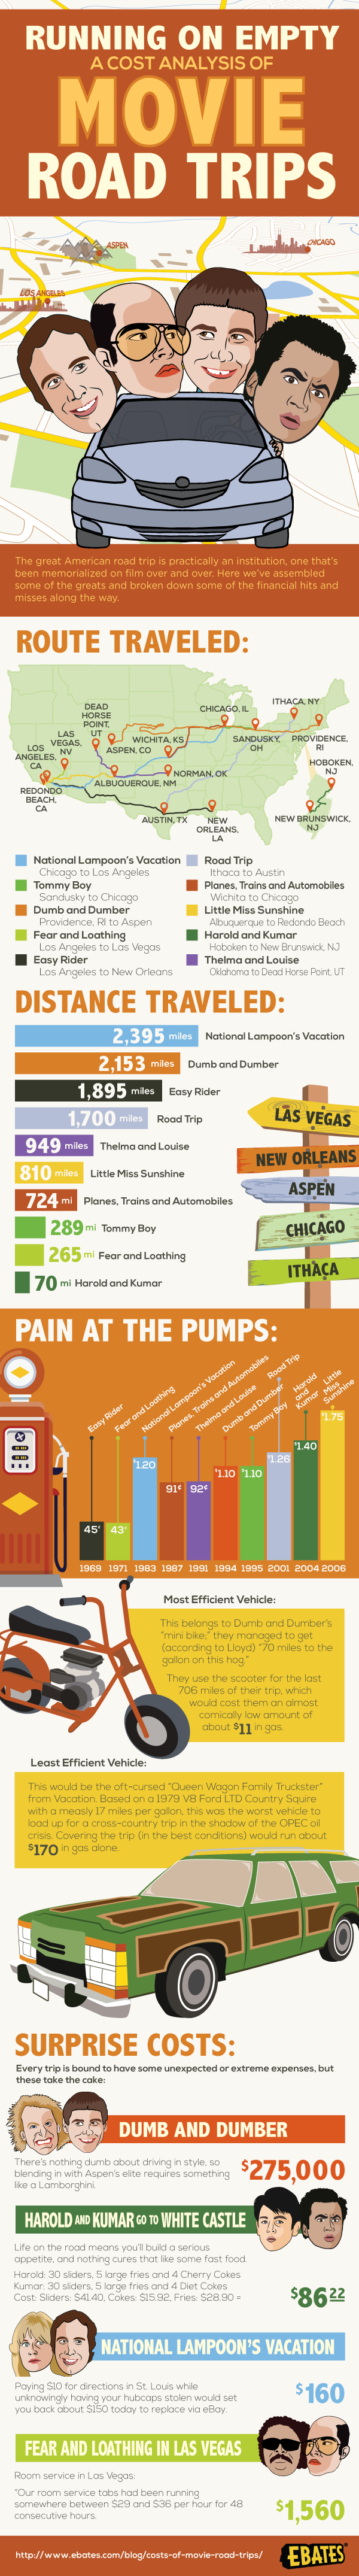 Movie Road Trips Infographic